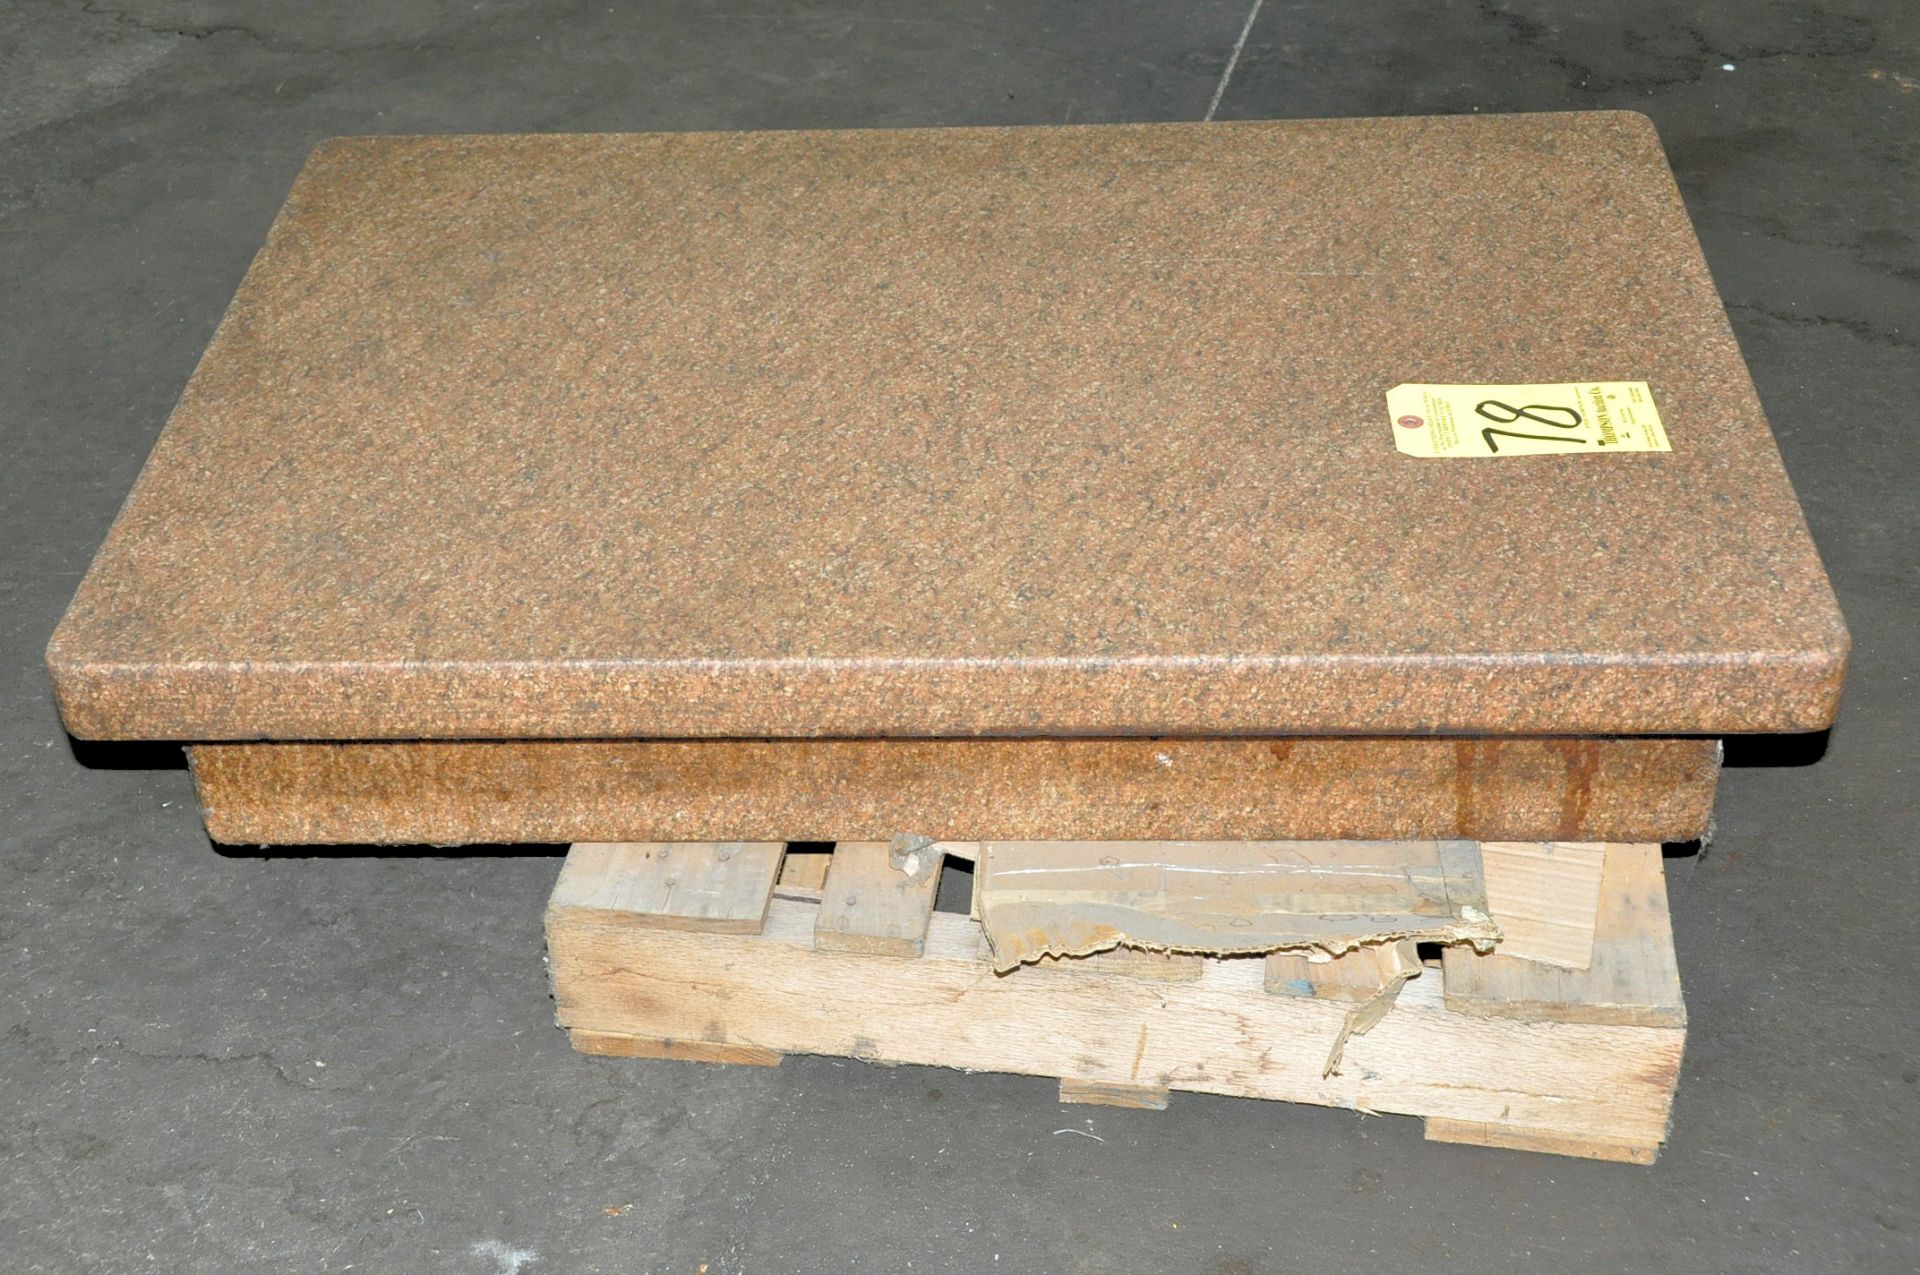 24" x 36" x 6" 4-Ledge Pink Granite Surface Plate on Pallet - Image 2 of 2